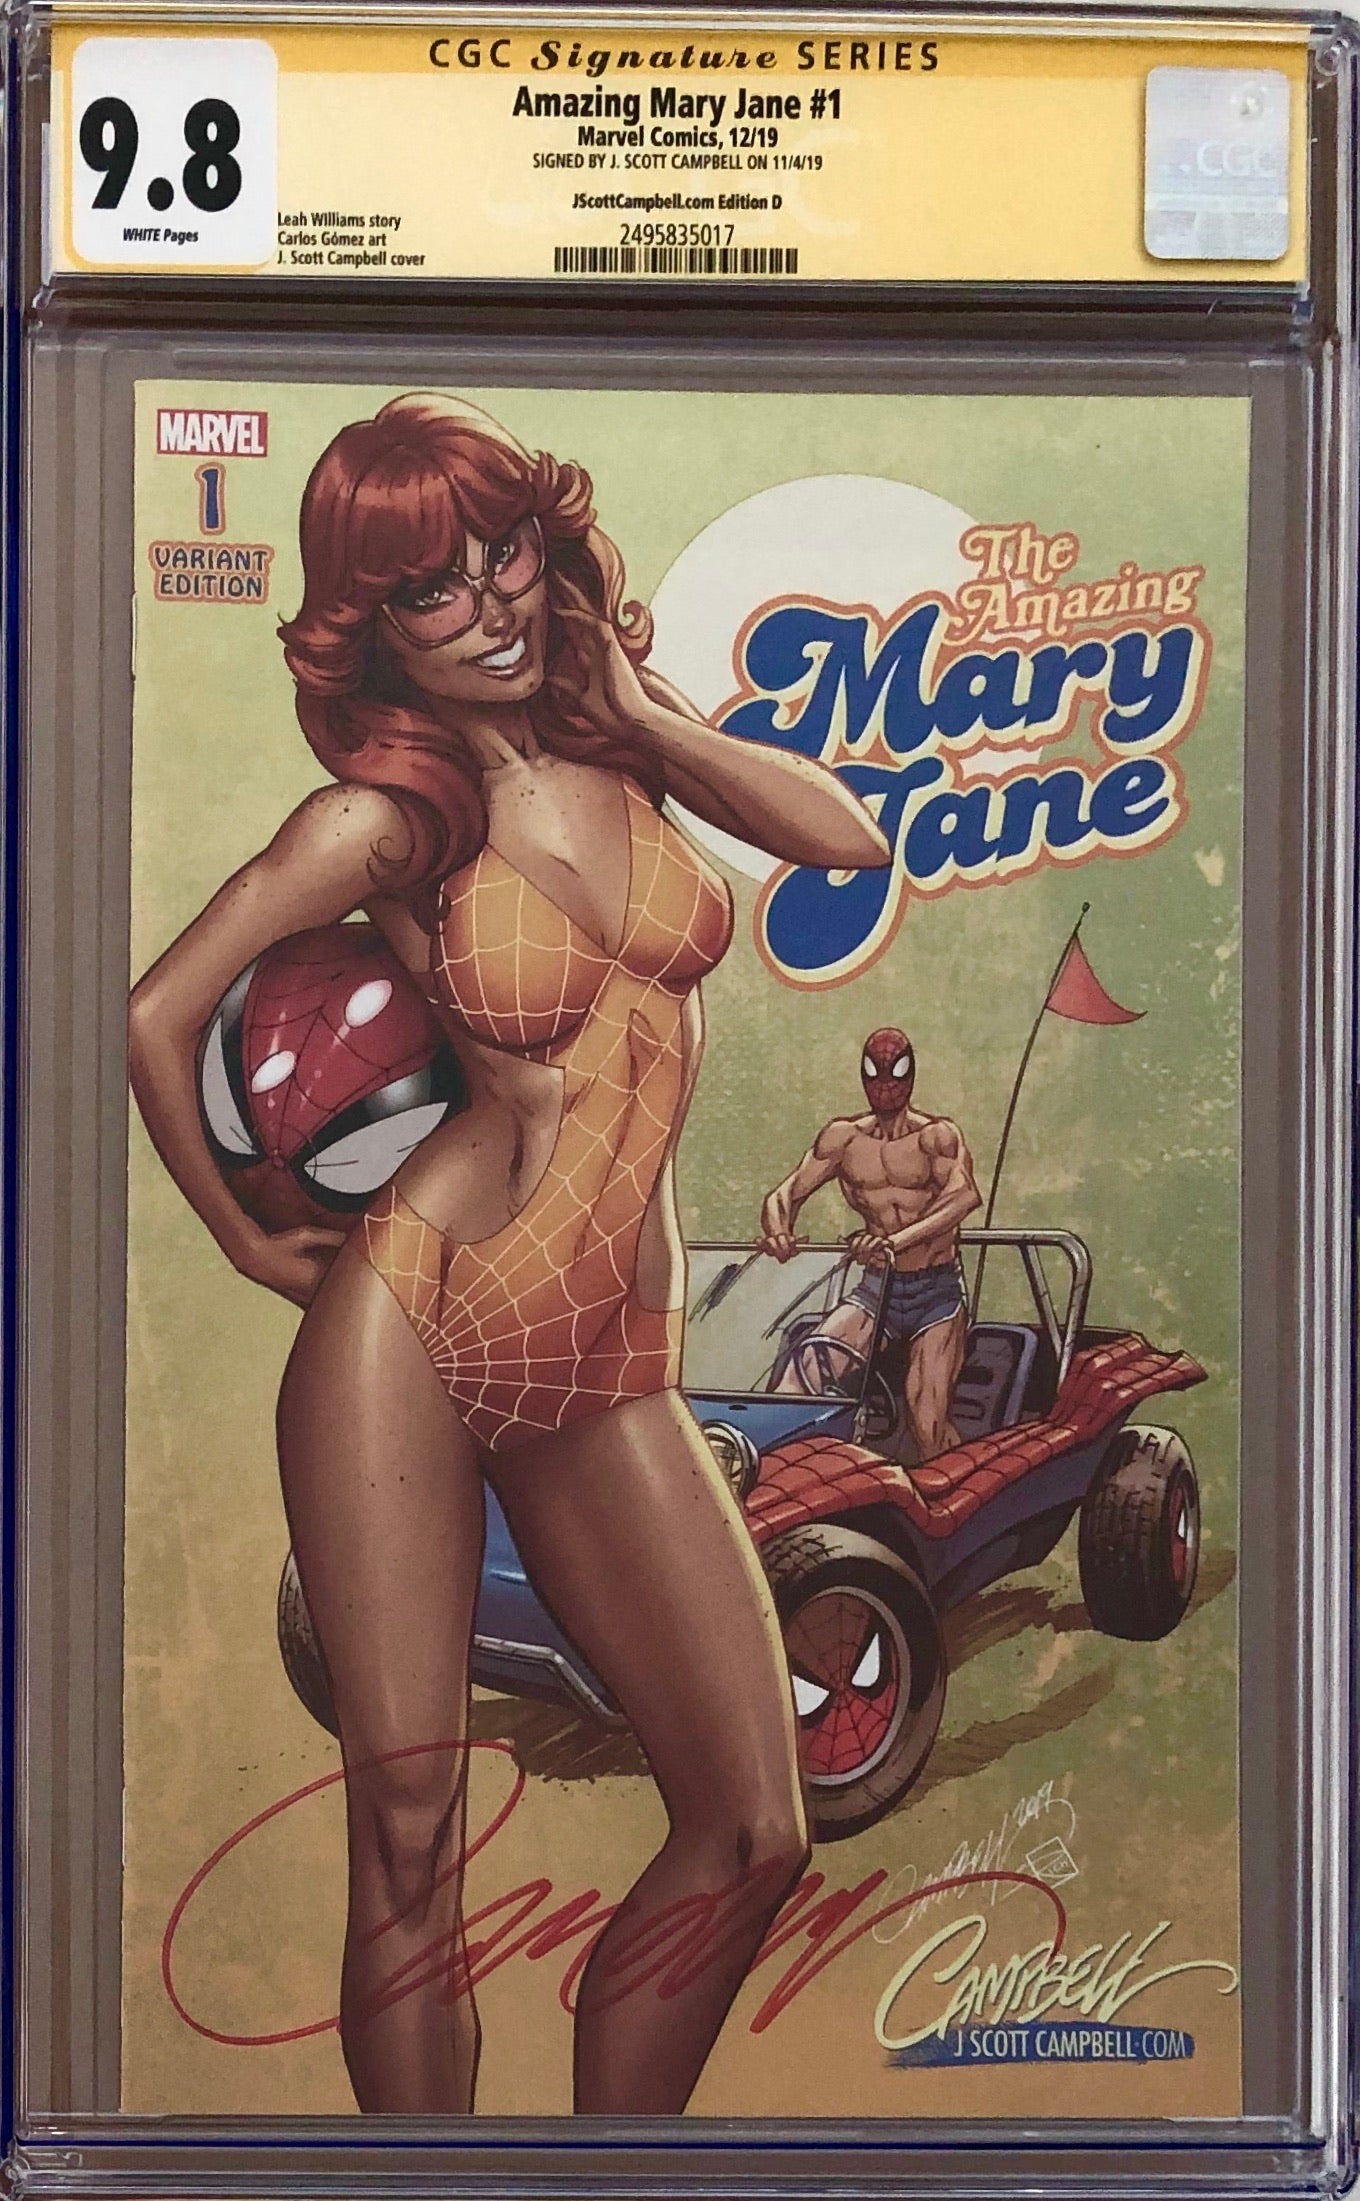 Amazing Mary Jane #1 J. Scott Campbell Exclusive D - "70s - Feathered hair n' Spider-Buggy!" CGC 9.8 SS